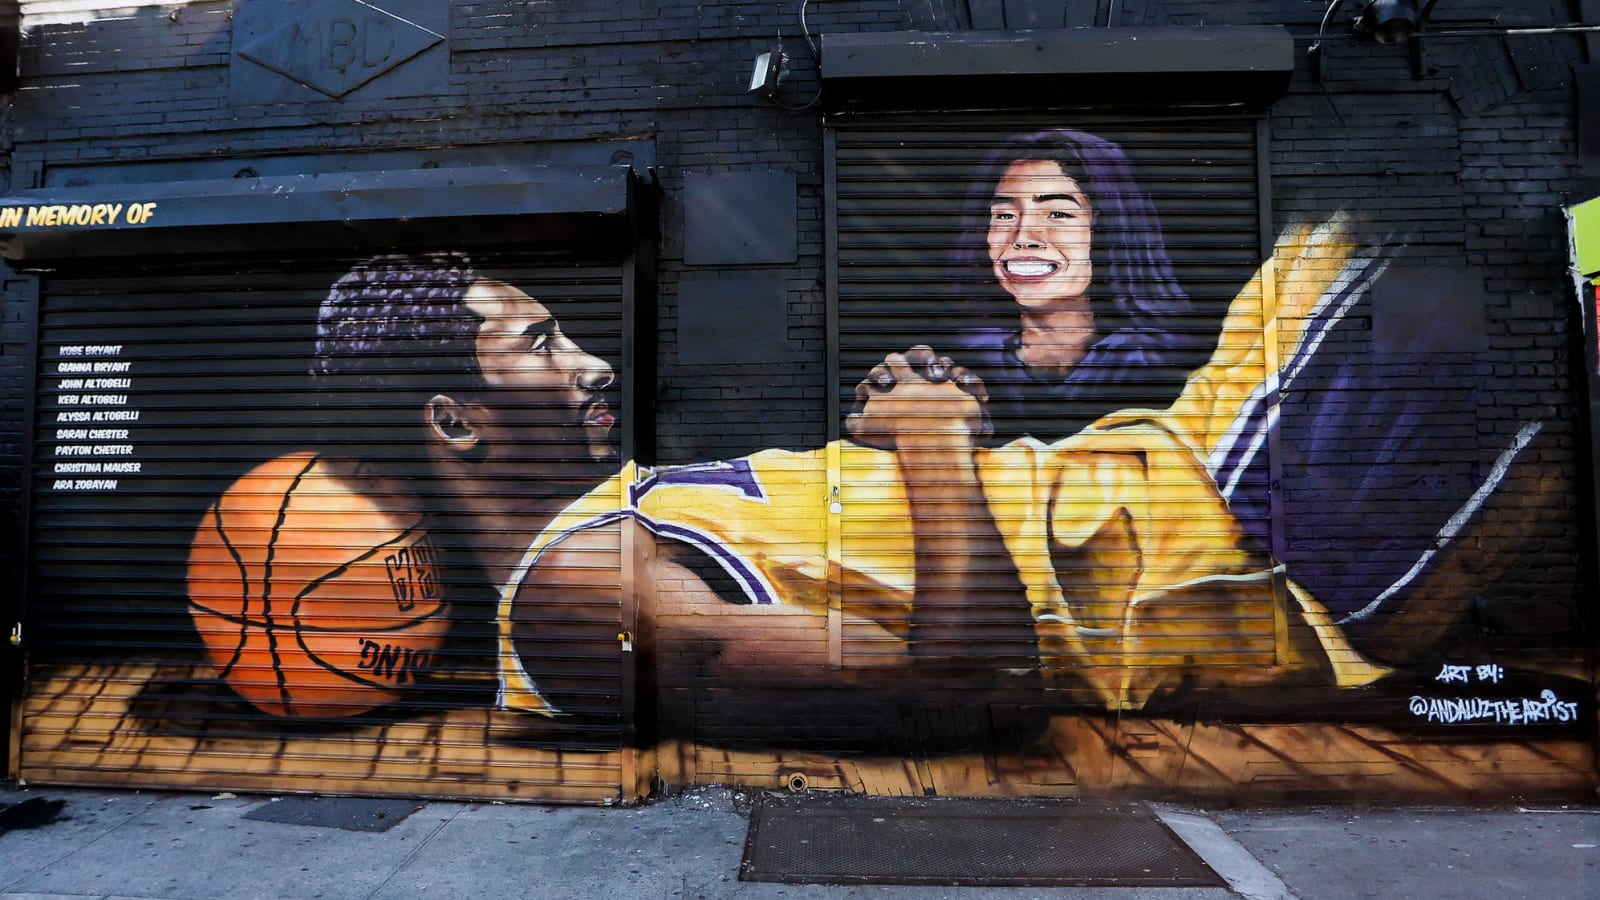 U.S. board urges helicopter manufacturers to install black boxes after Kobe Bryant's death